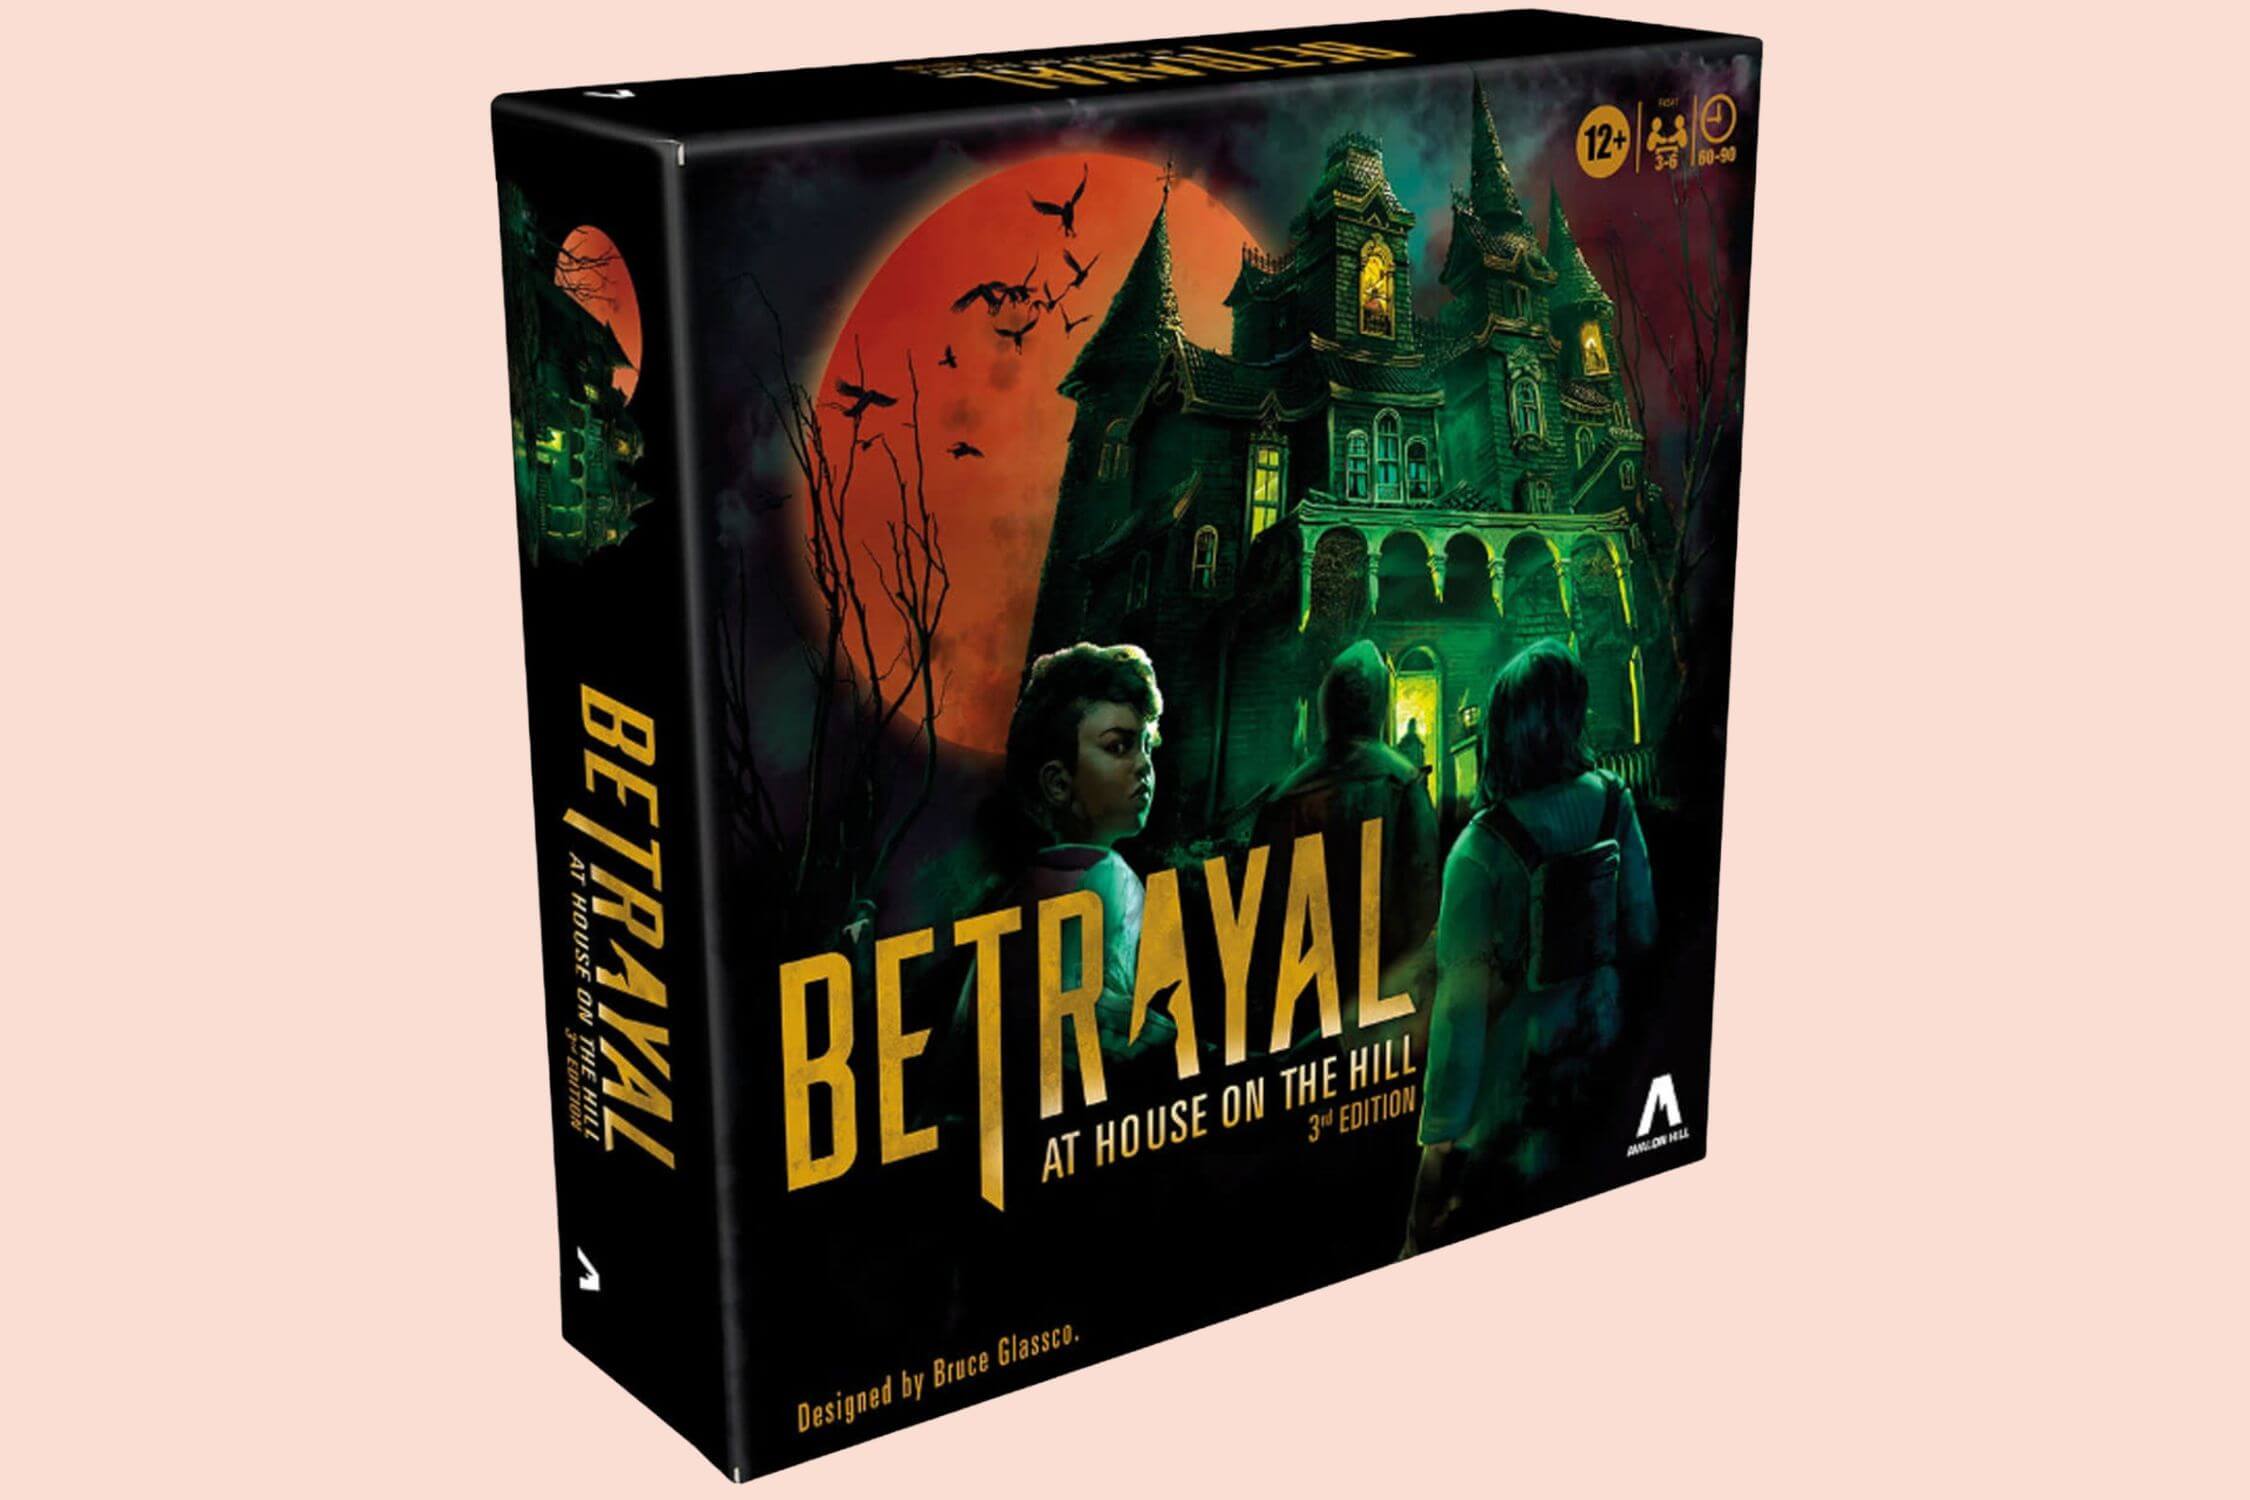 Betrayal at House on the Hill - Explore haunted house as a team